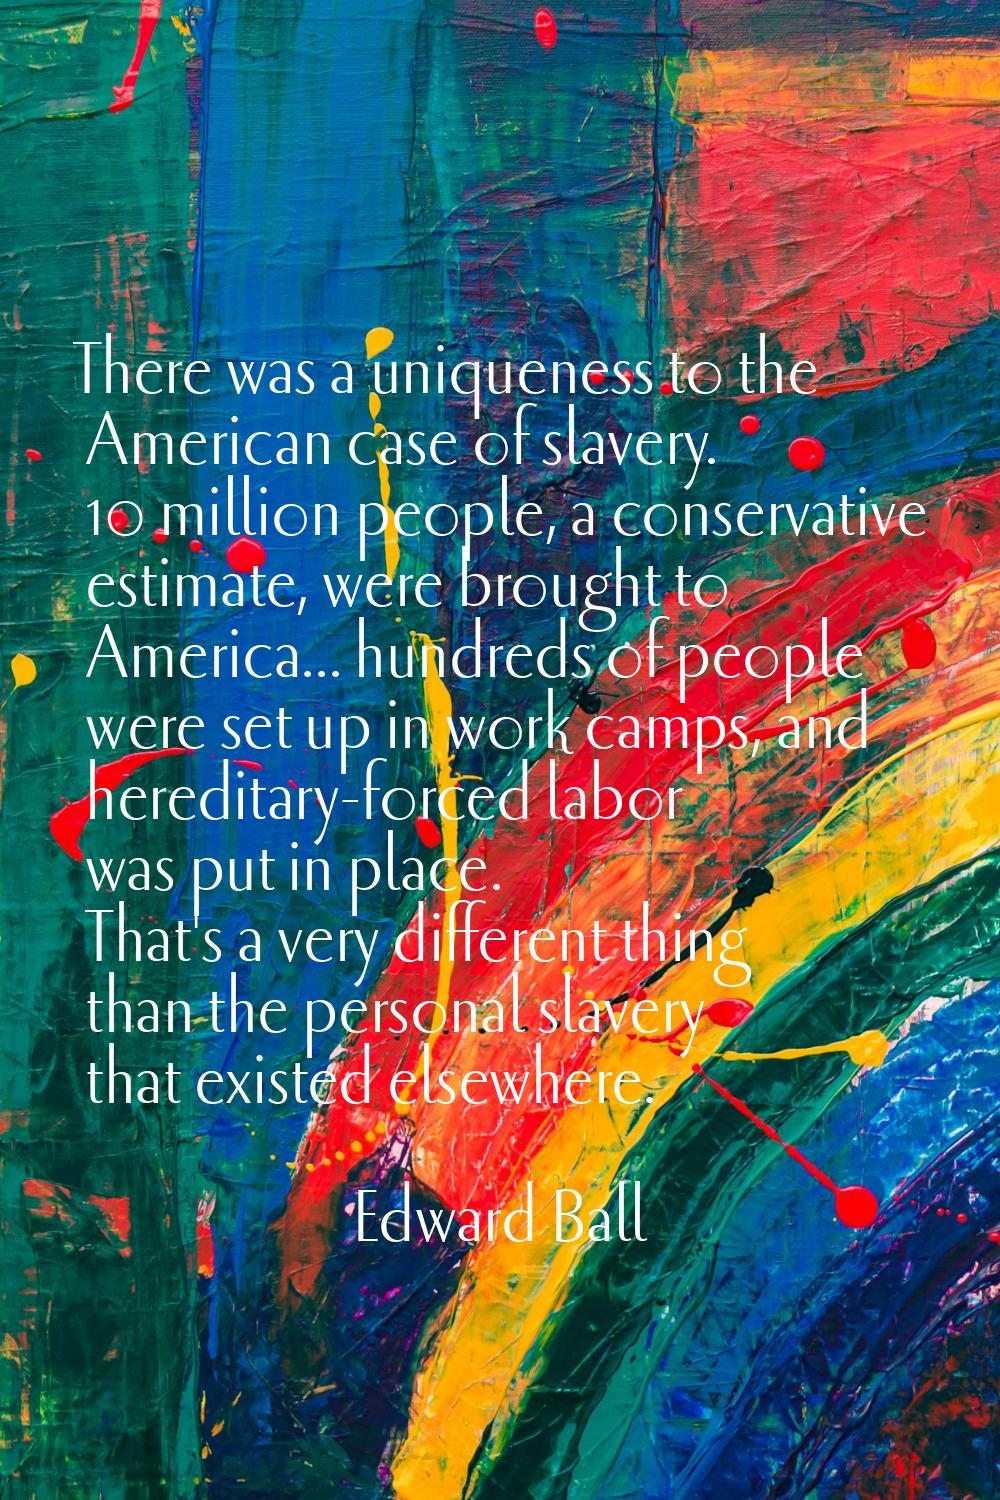 There was a uniqueness to the American case of slavery. 10 million people, a conservative estimate,